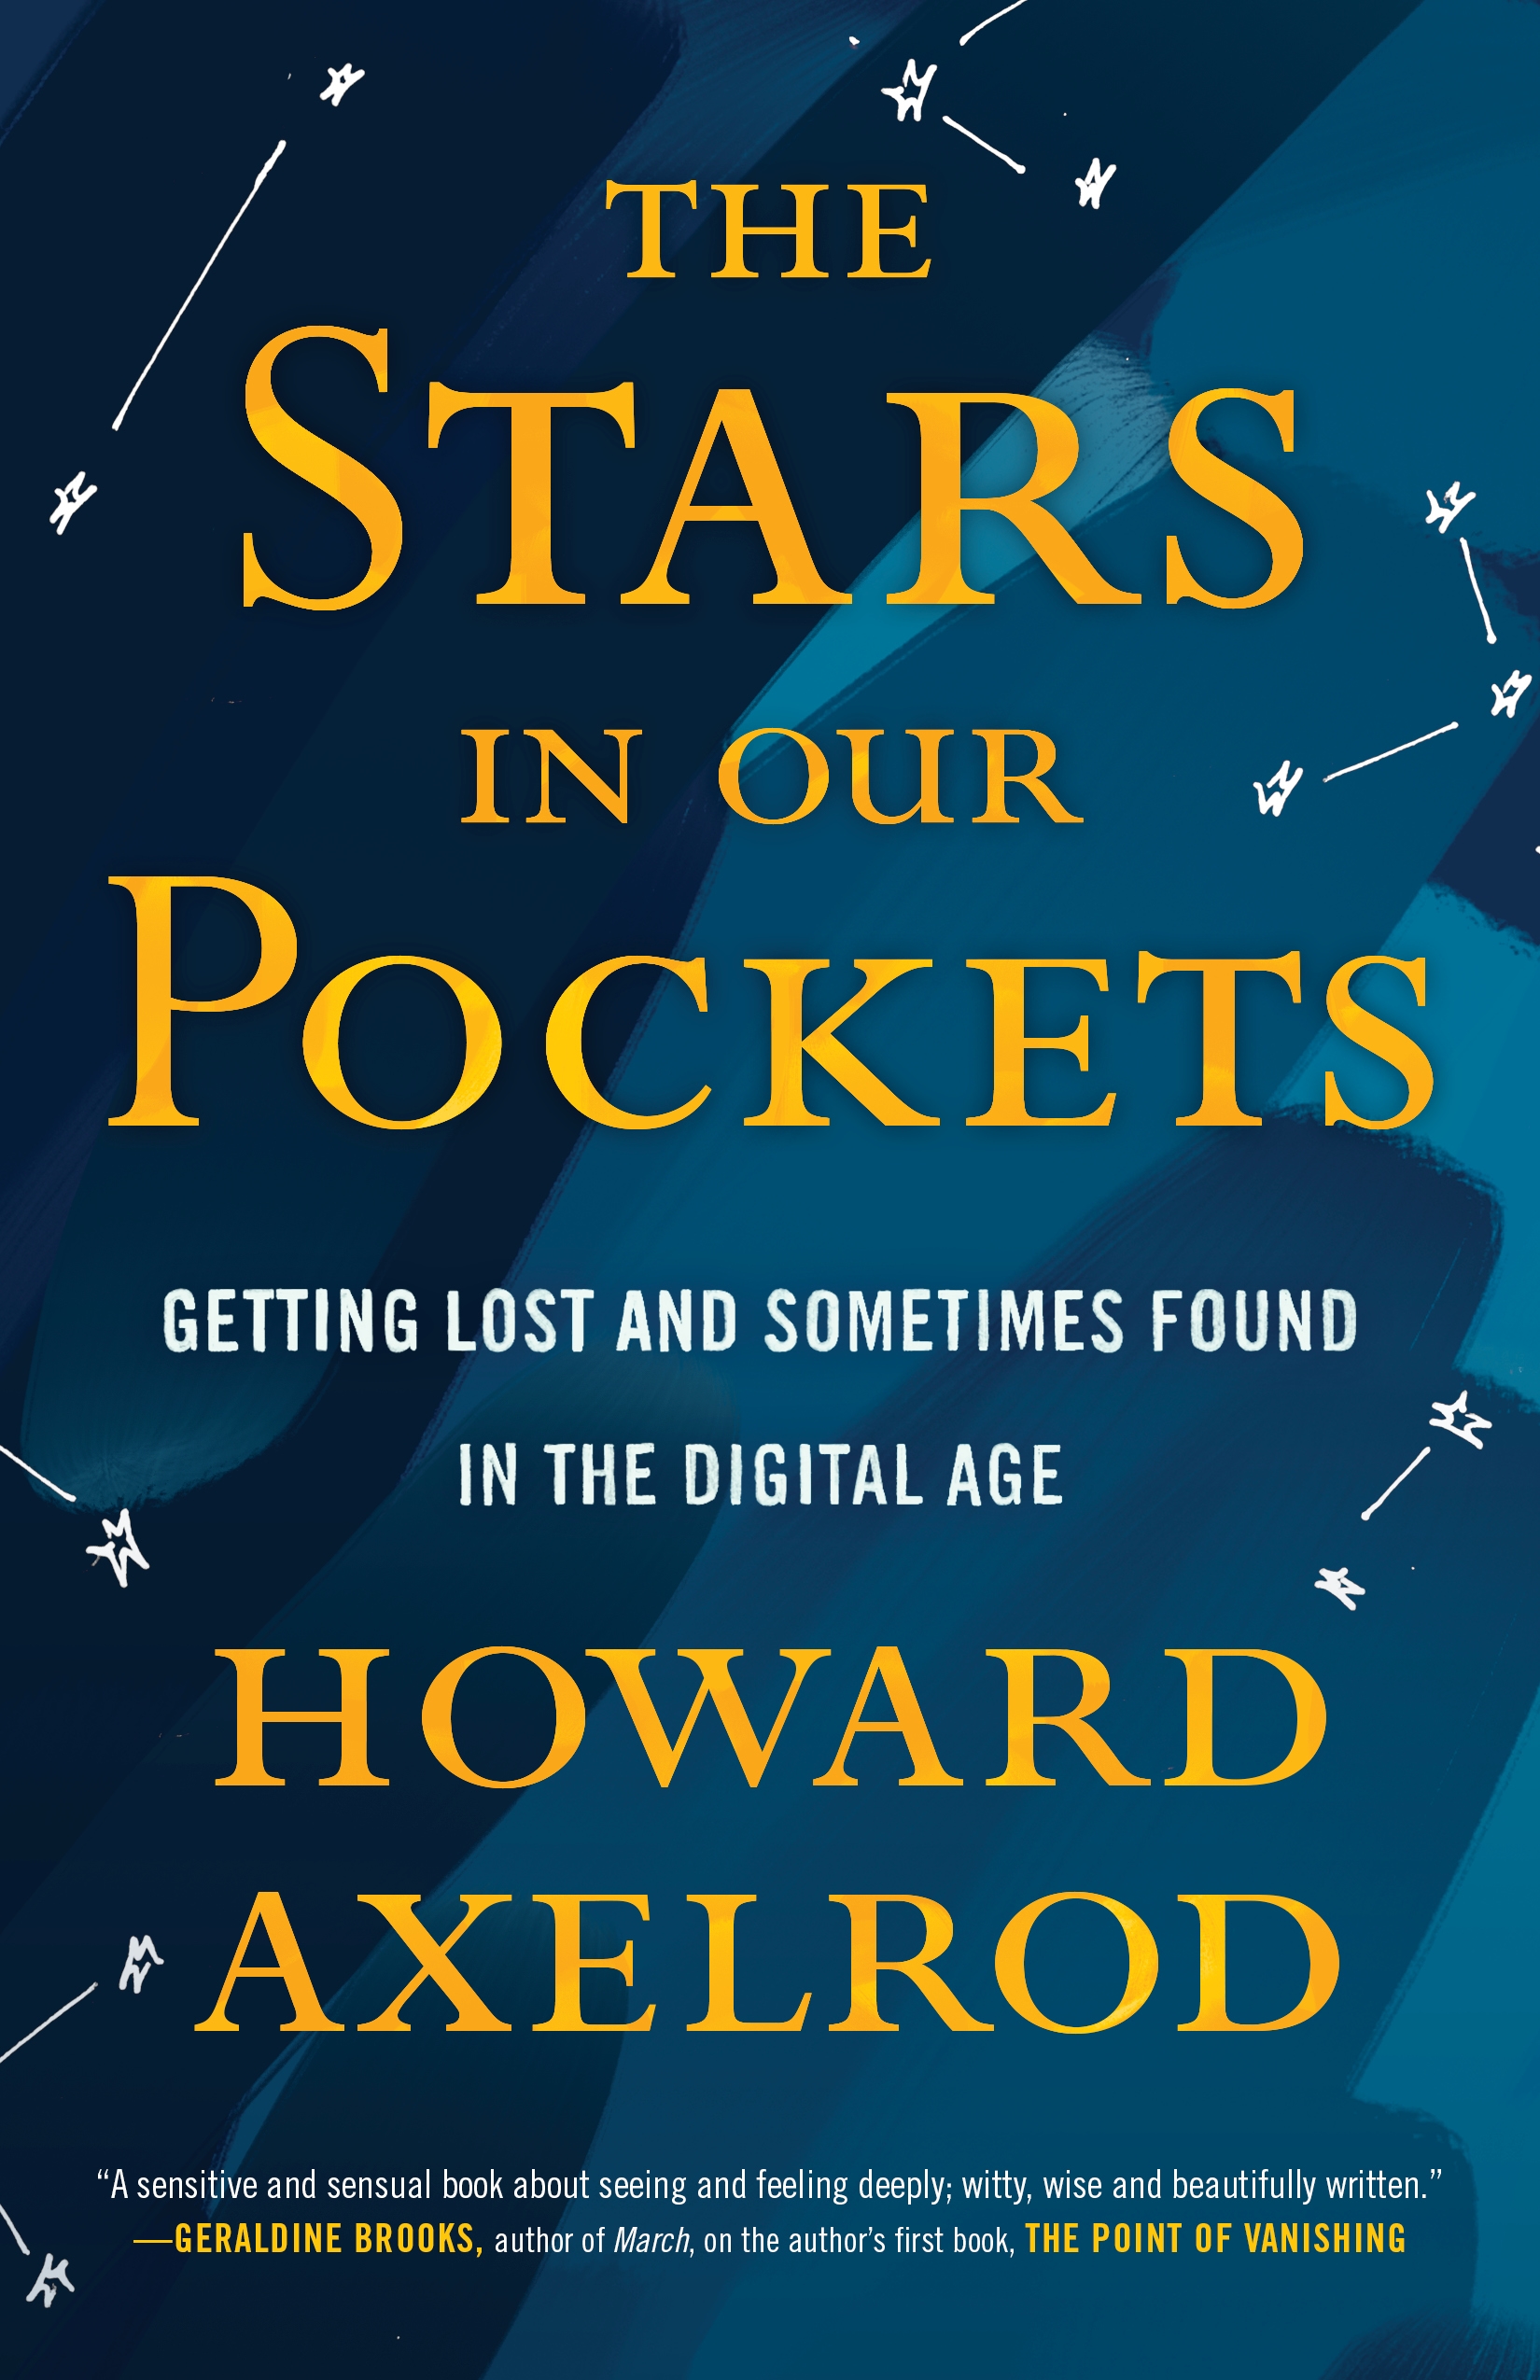 Lunchtime Book Talk with Howie Axelrod